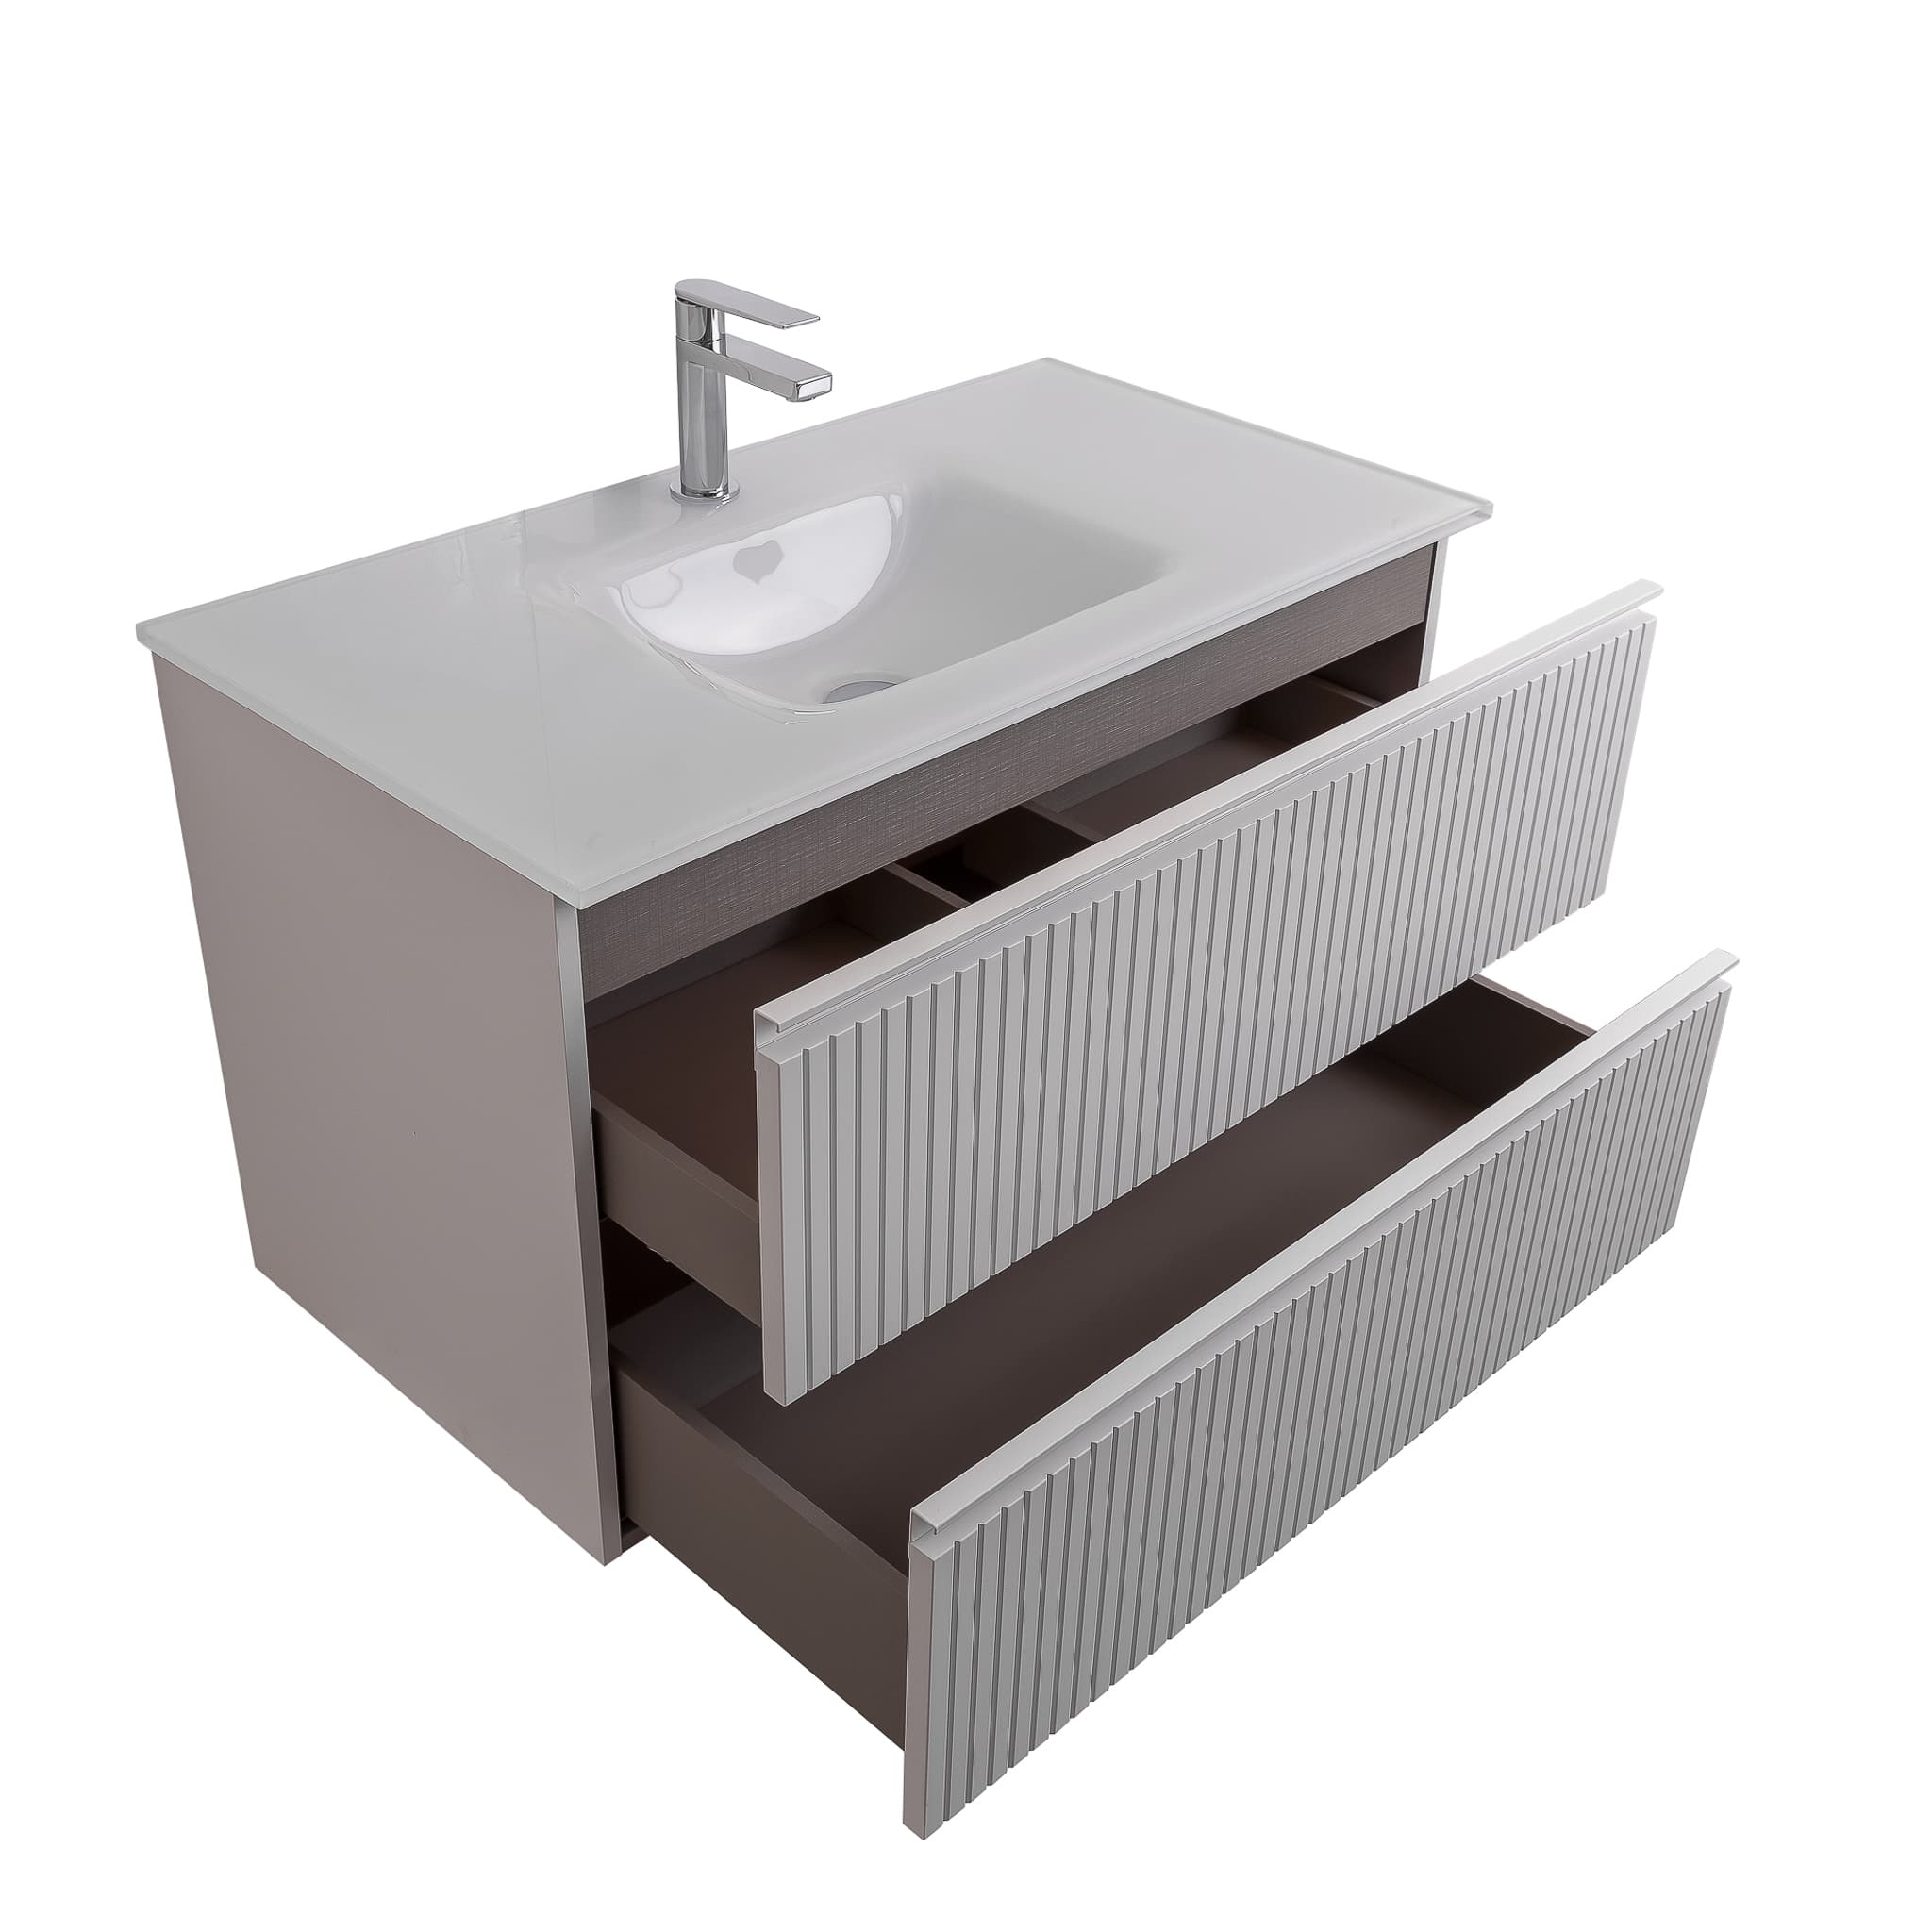 Ares 39.5 Matte White Cabinet, White Tempered Glass Sink, Wall Mounted Modern Vanity Set